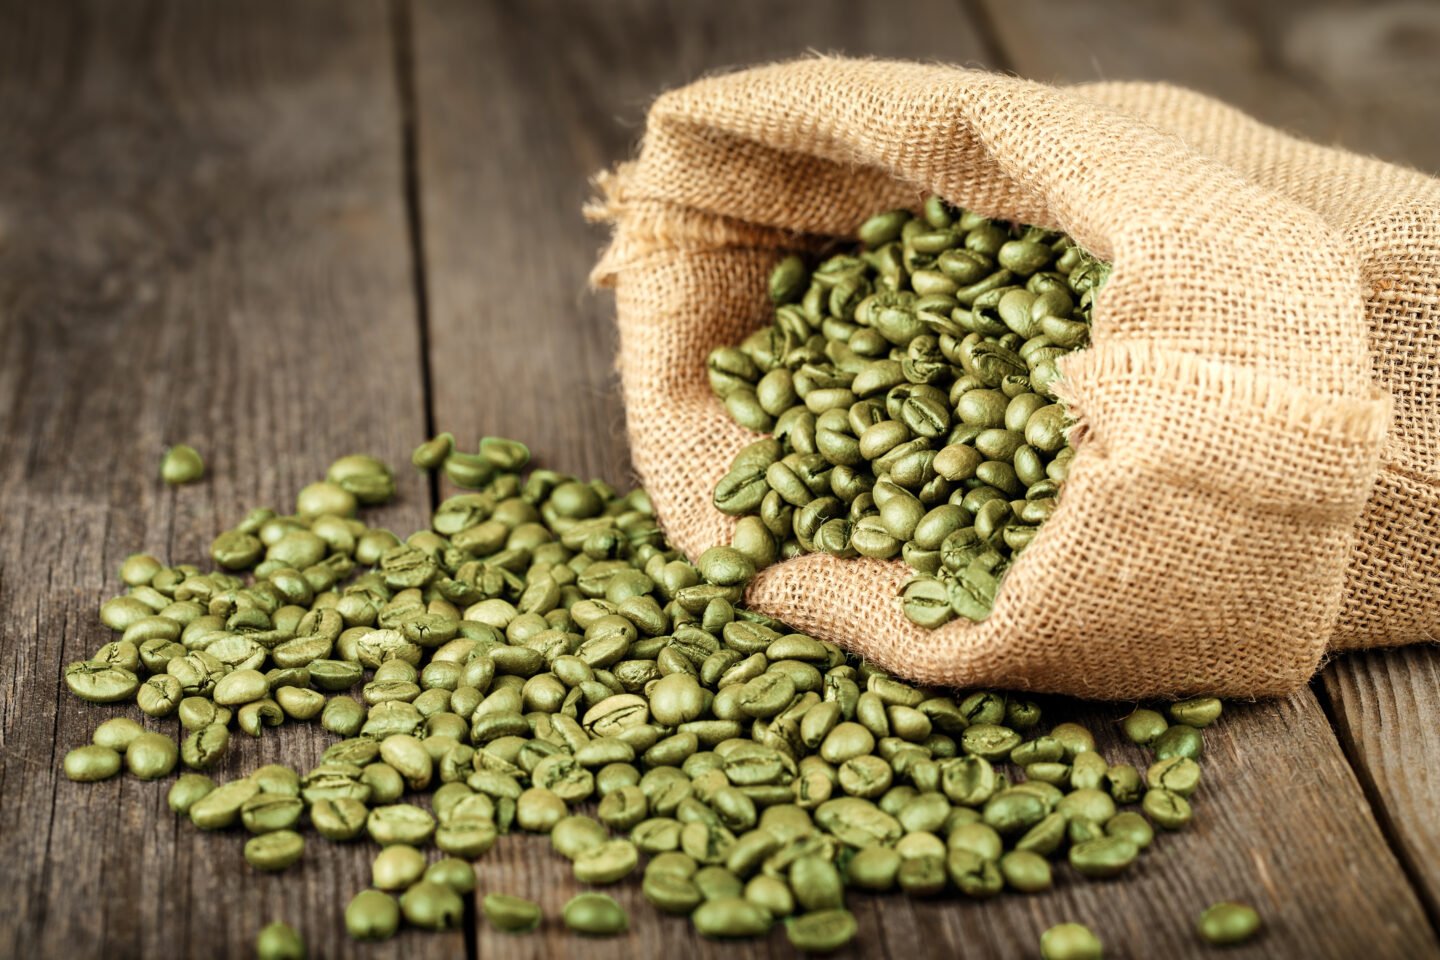 a-sack-of-green-coffee-beans